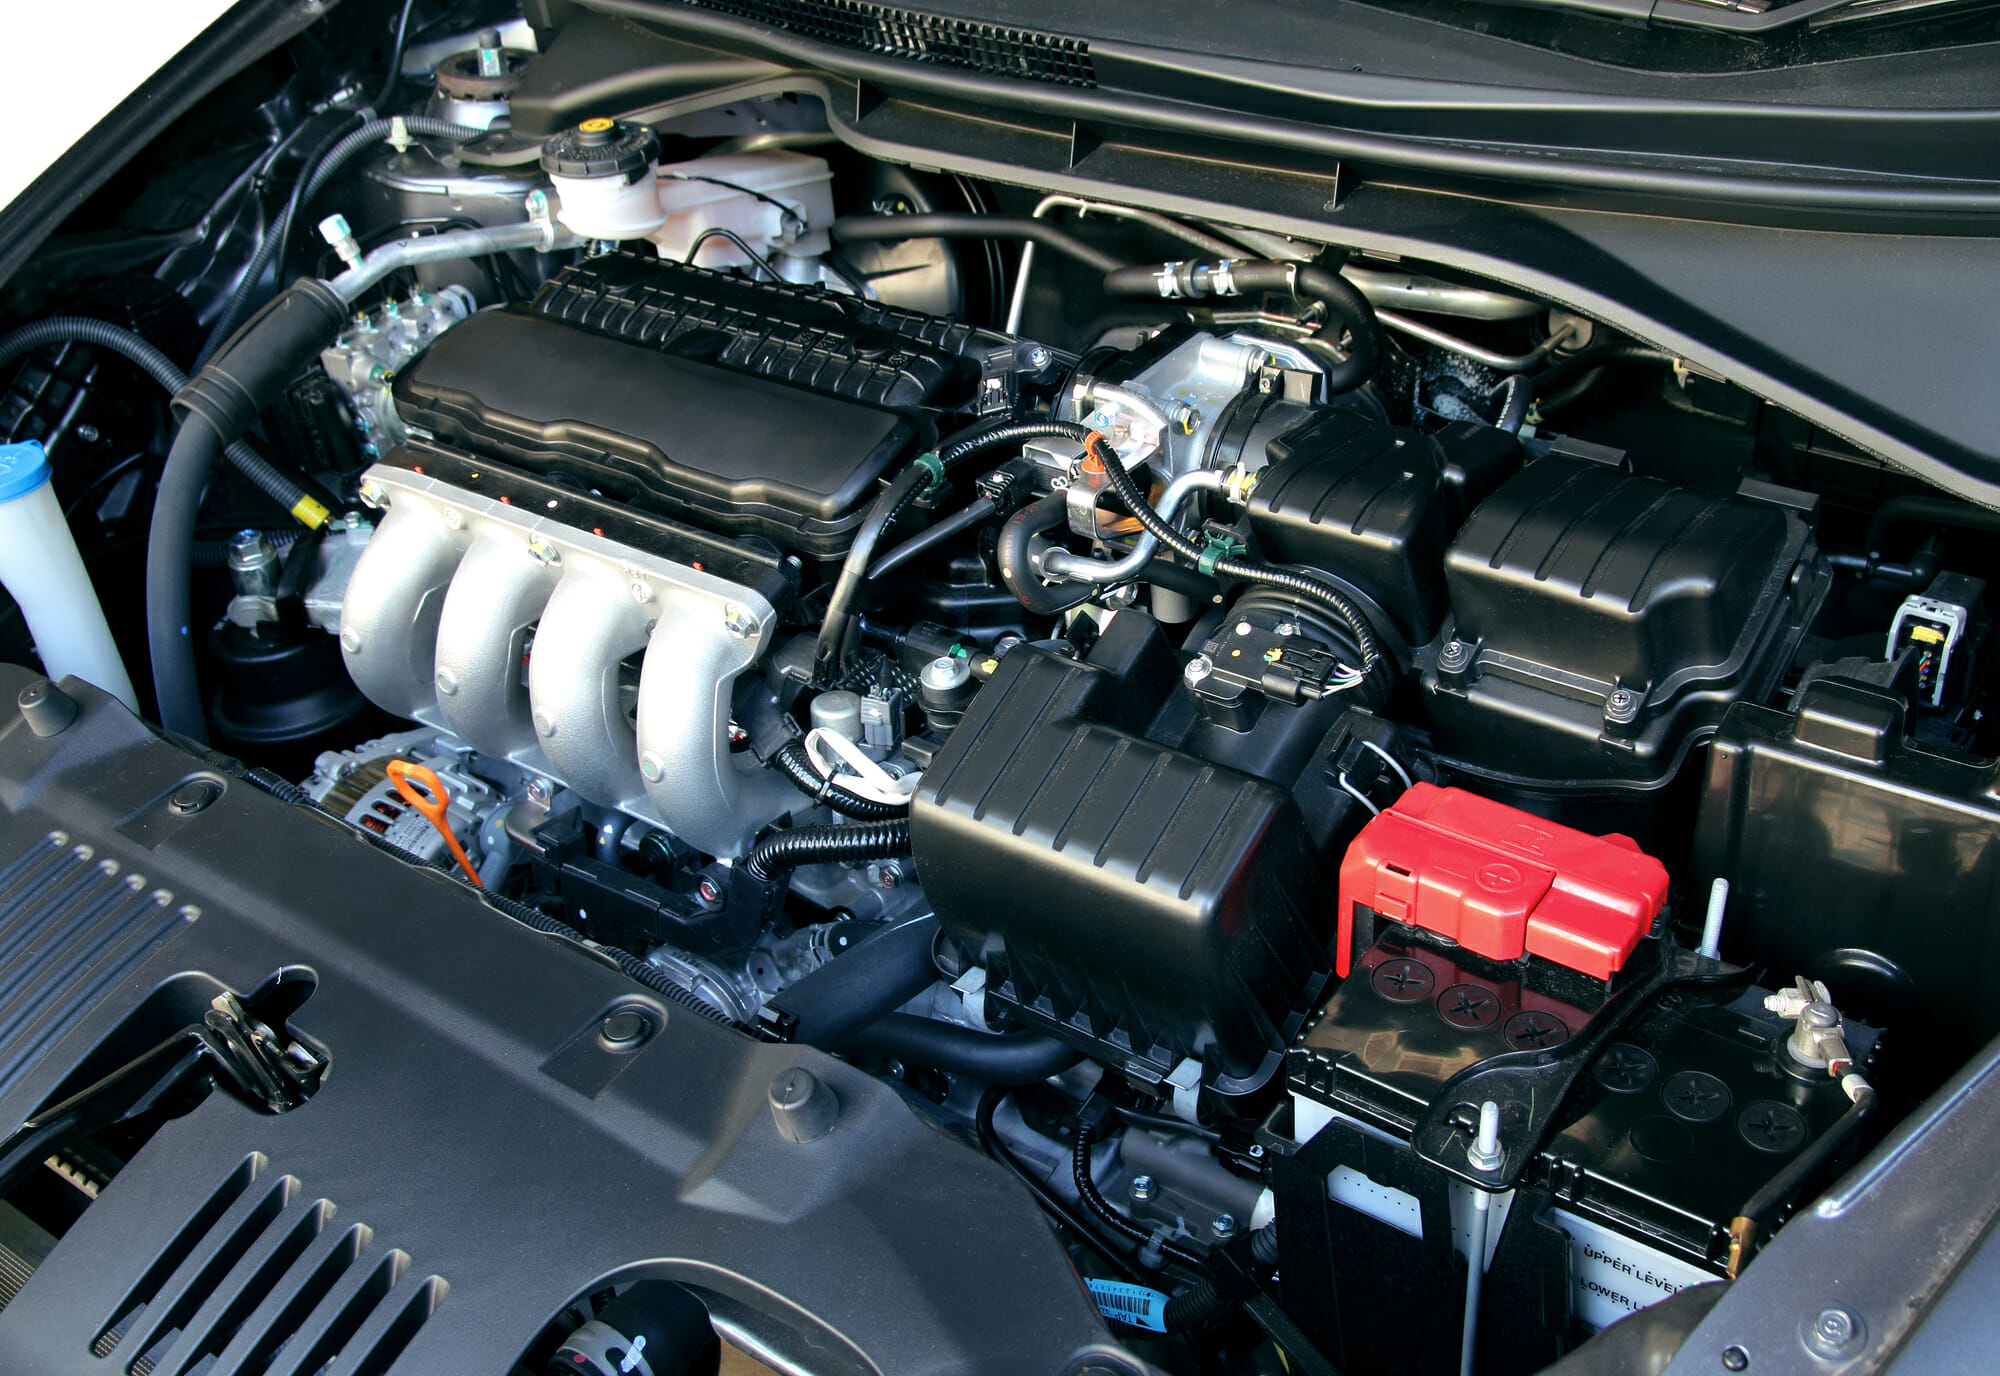 How to Tell if Your Car’s Engine is Bad